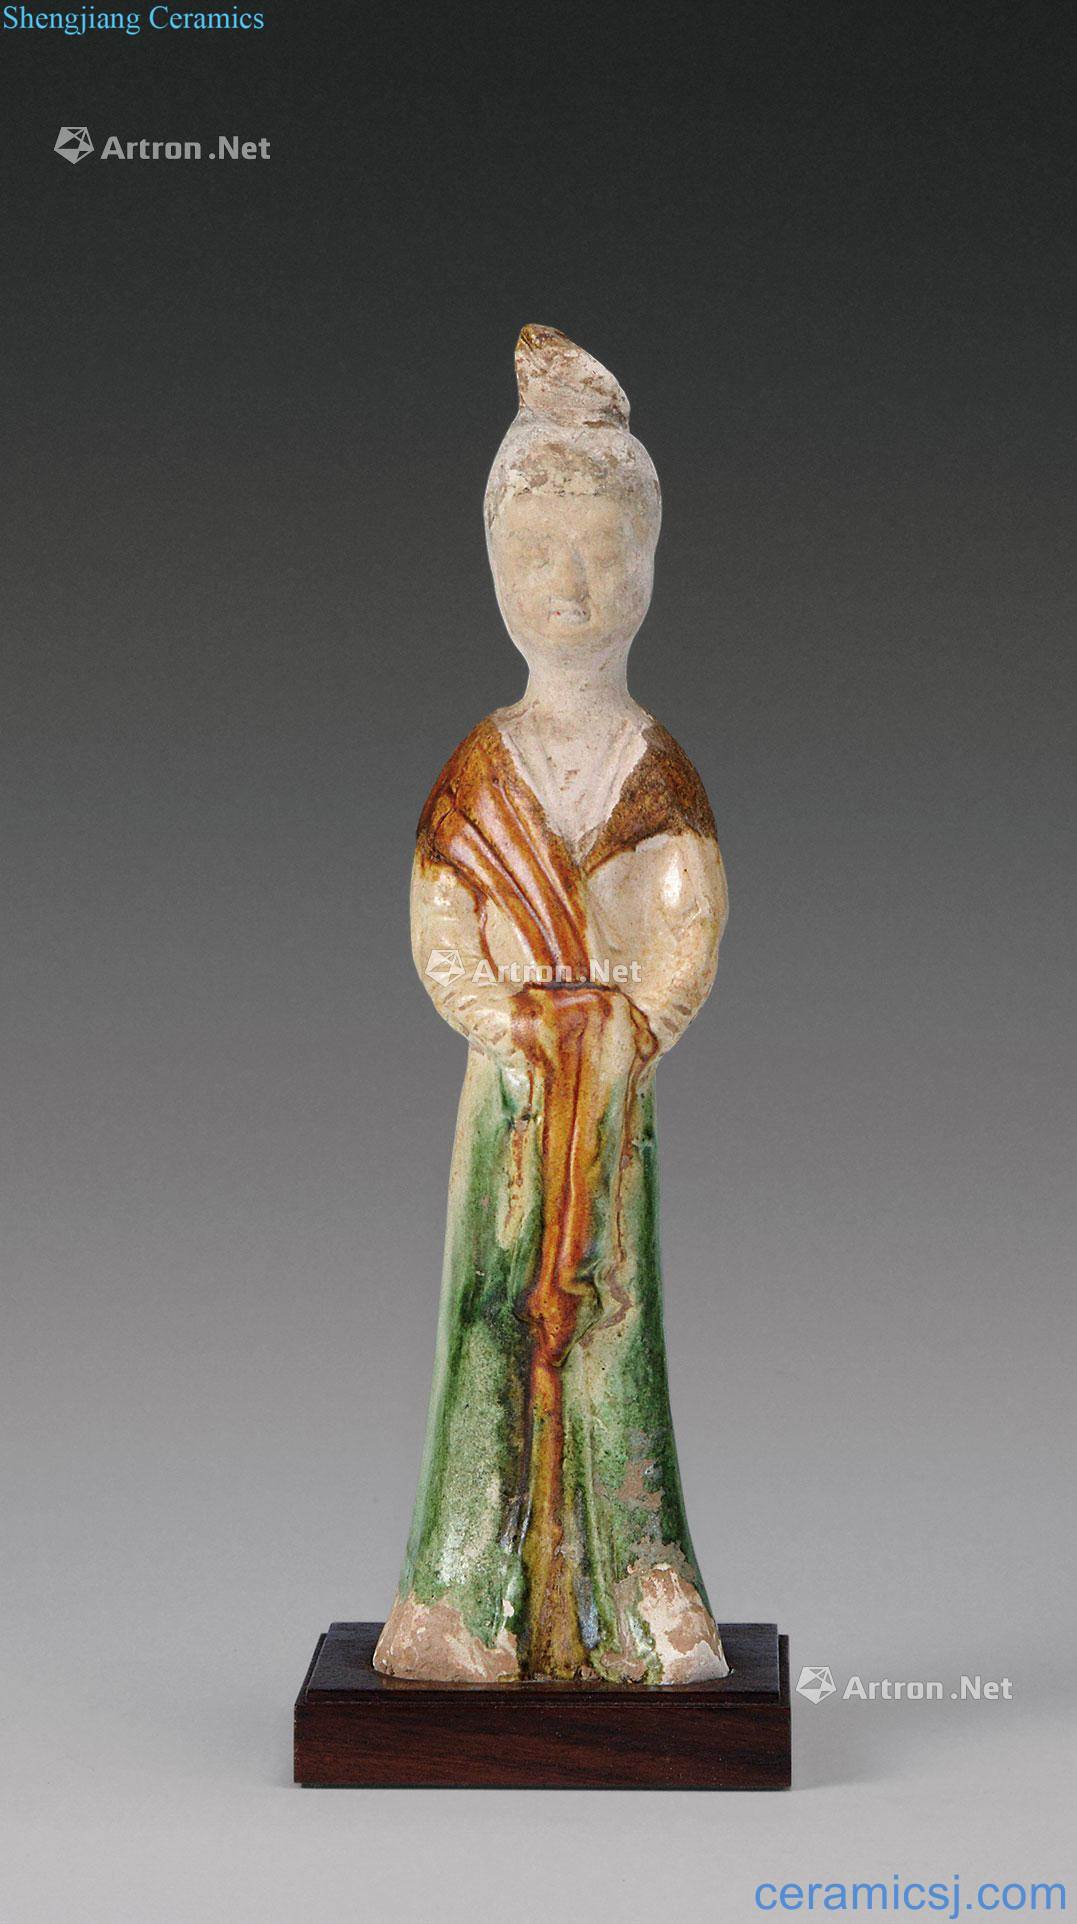 However, the tang dynasty (618-907), three-color figurines